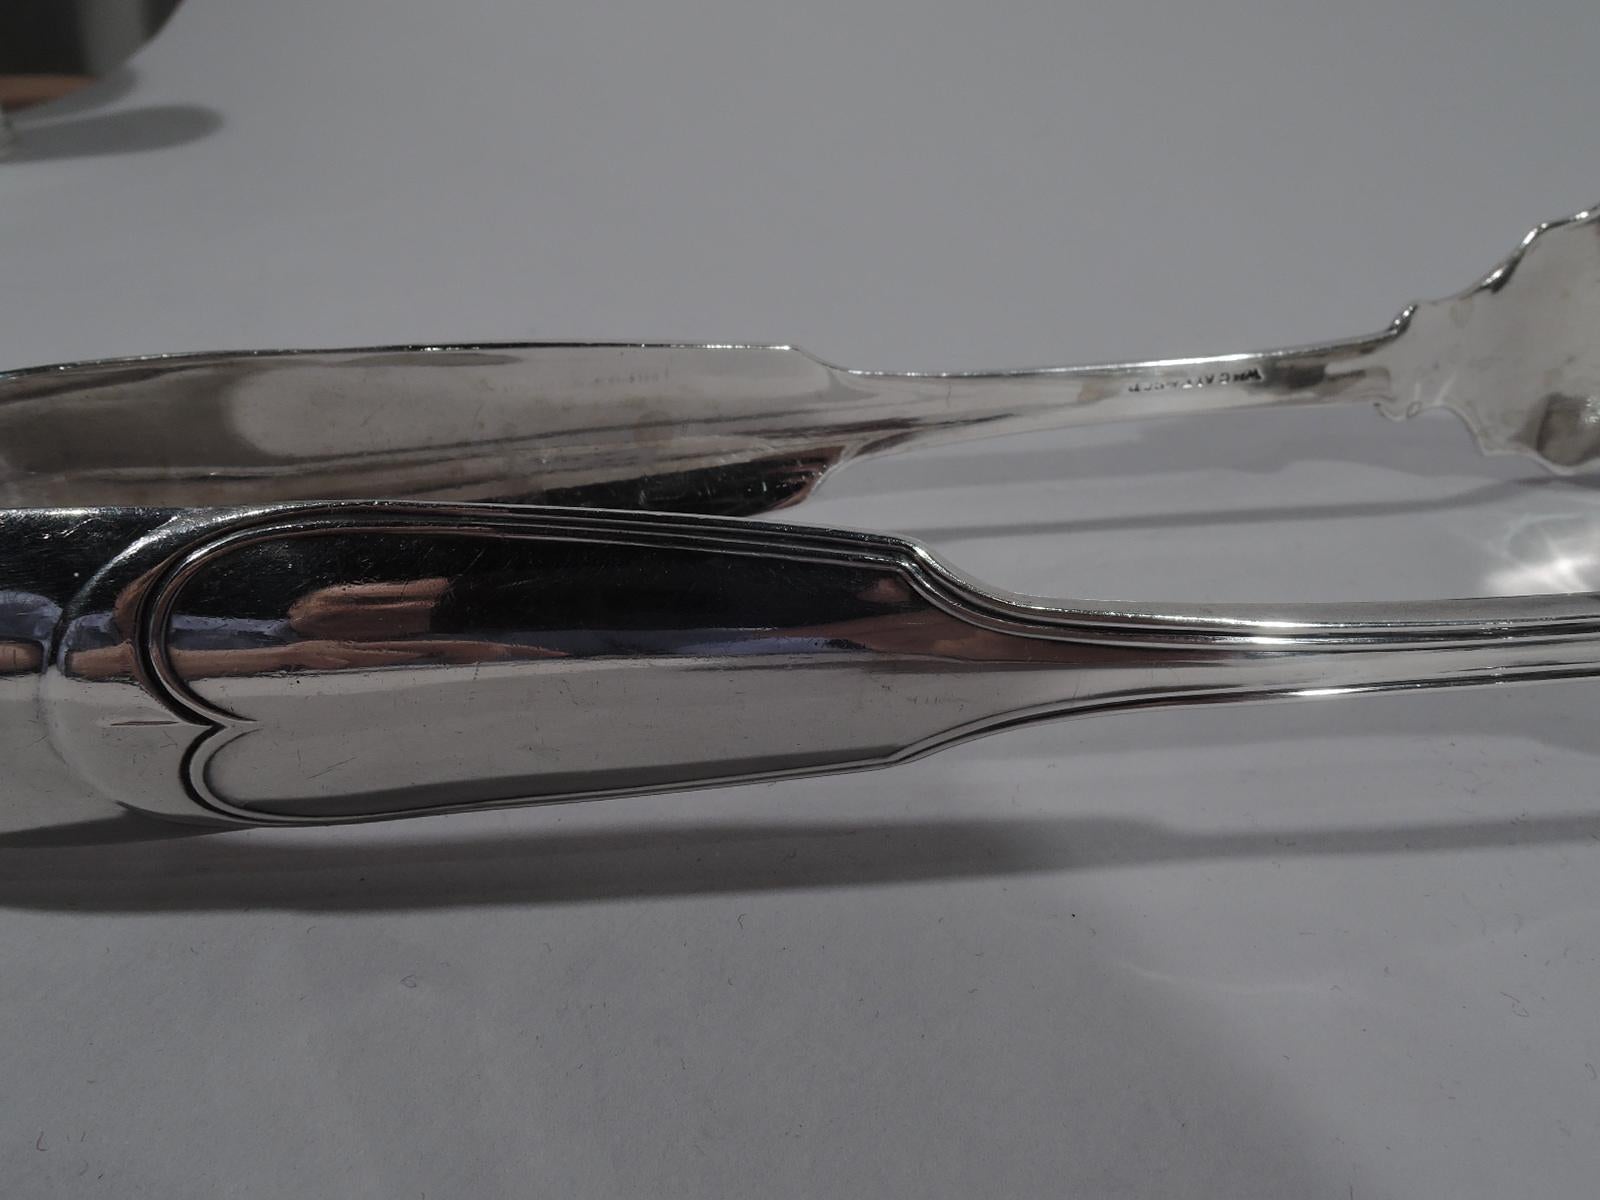 Classical coin silver serving tongs. Made by William Gale & Son in New York. U-form with traditional English double-scroll terminal on each side and scalloped shanks. One side has shaped blade with open rectangles; the other side has 3 tines.